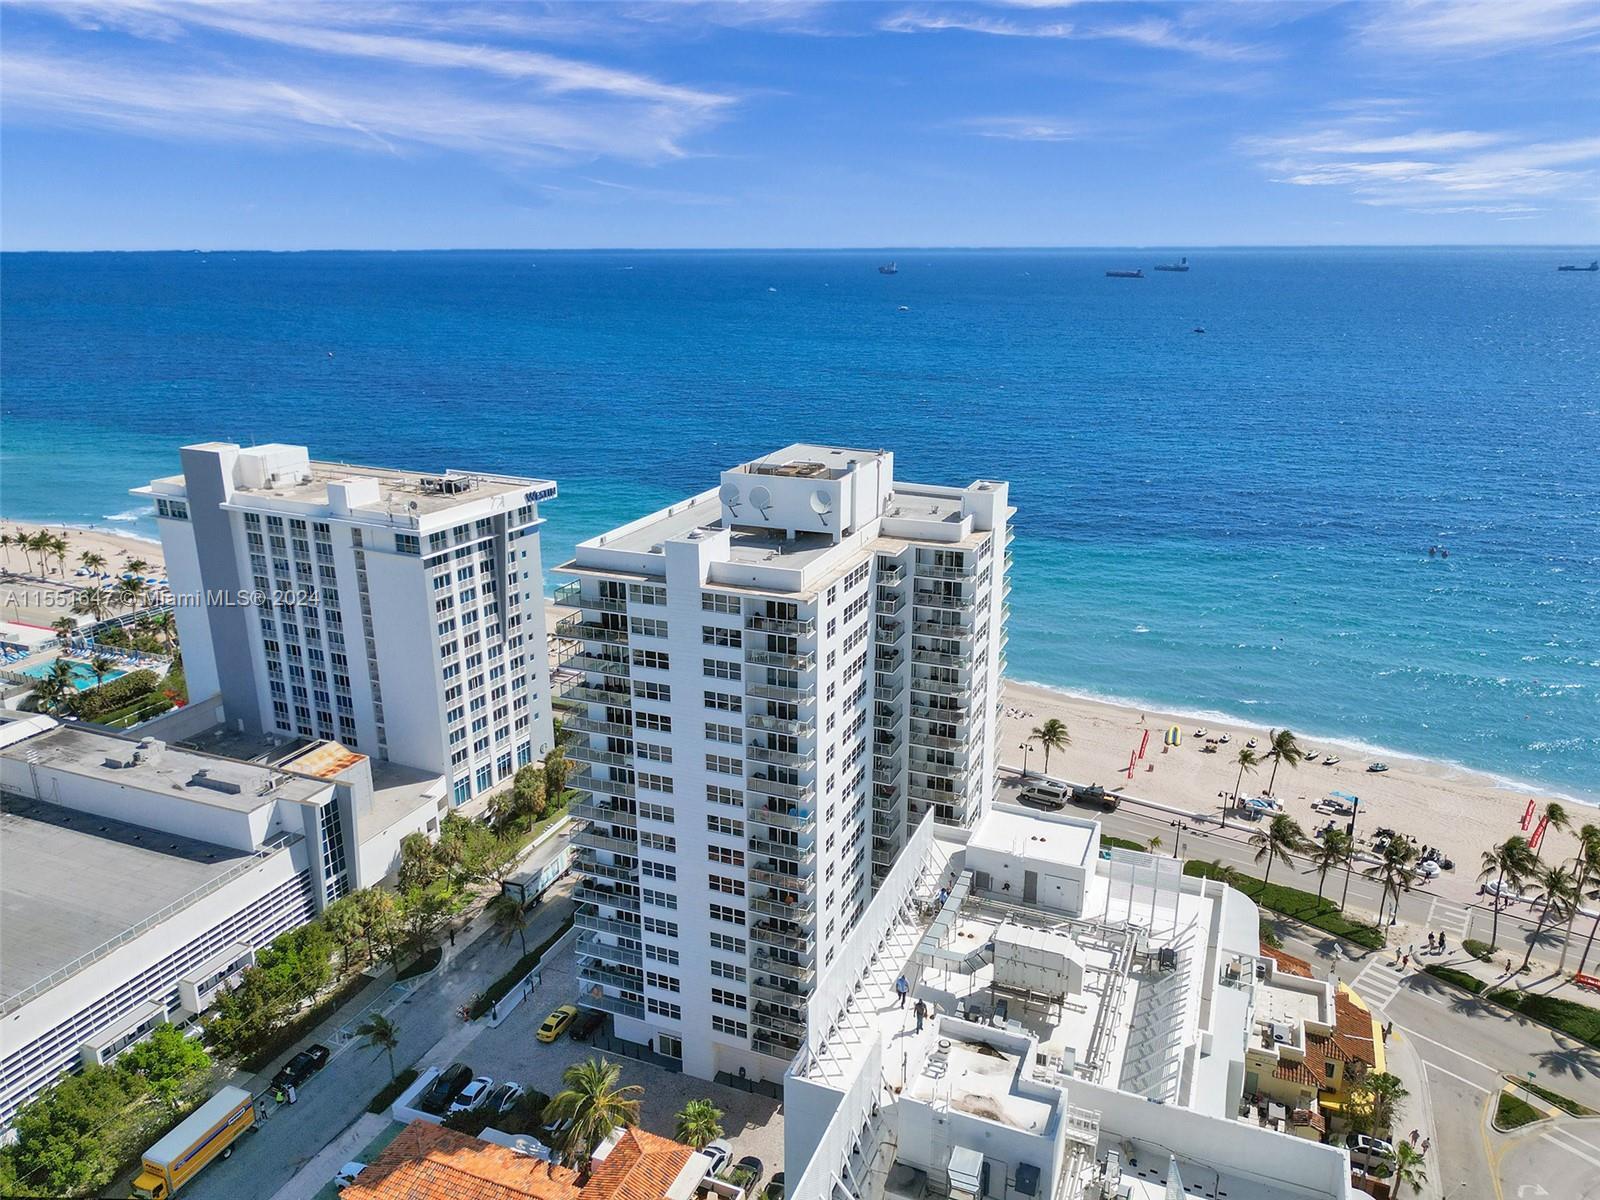 Photo of 209 N Fort Lauderdale Beach Blvd #2E in Fort Lauderdale, FL